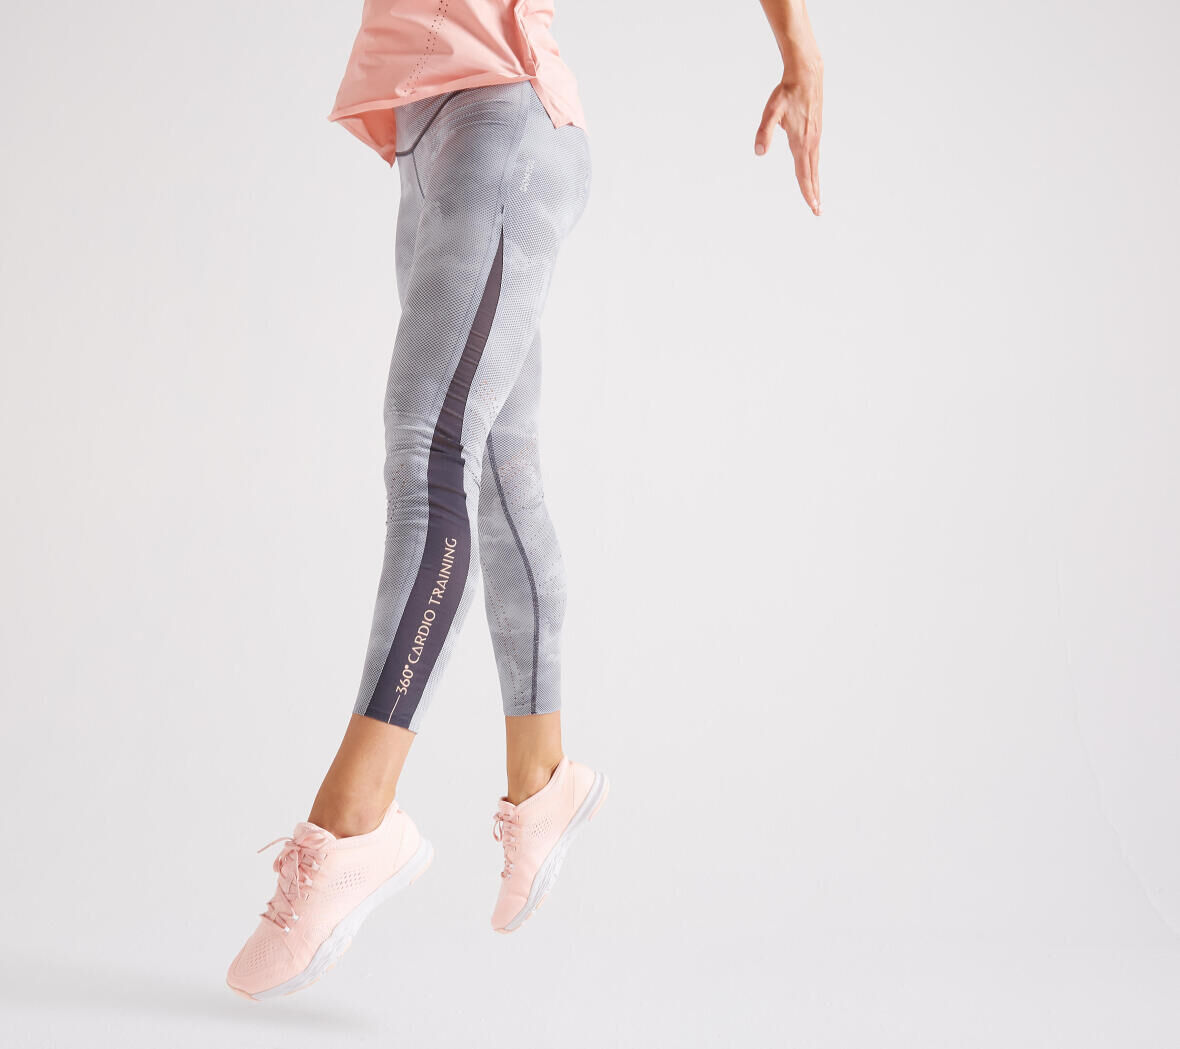 legging-choose-women-fitness-outfit